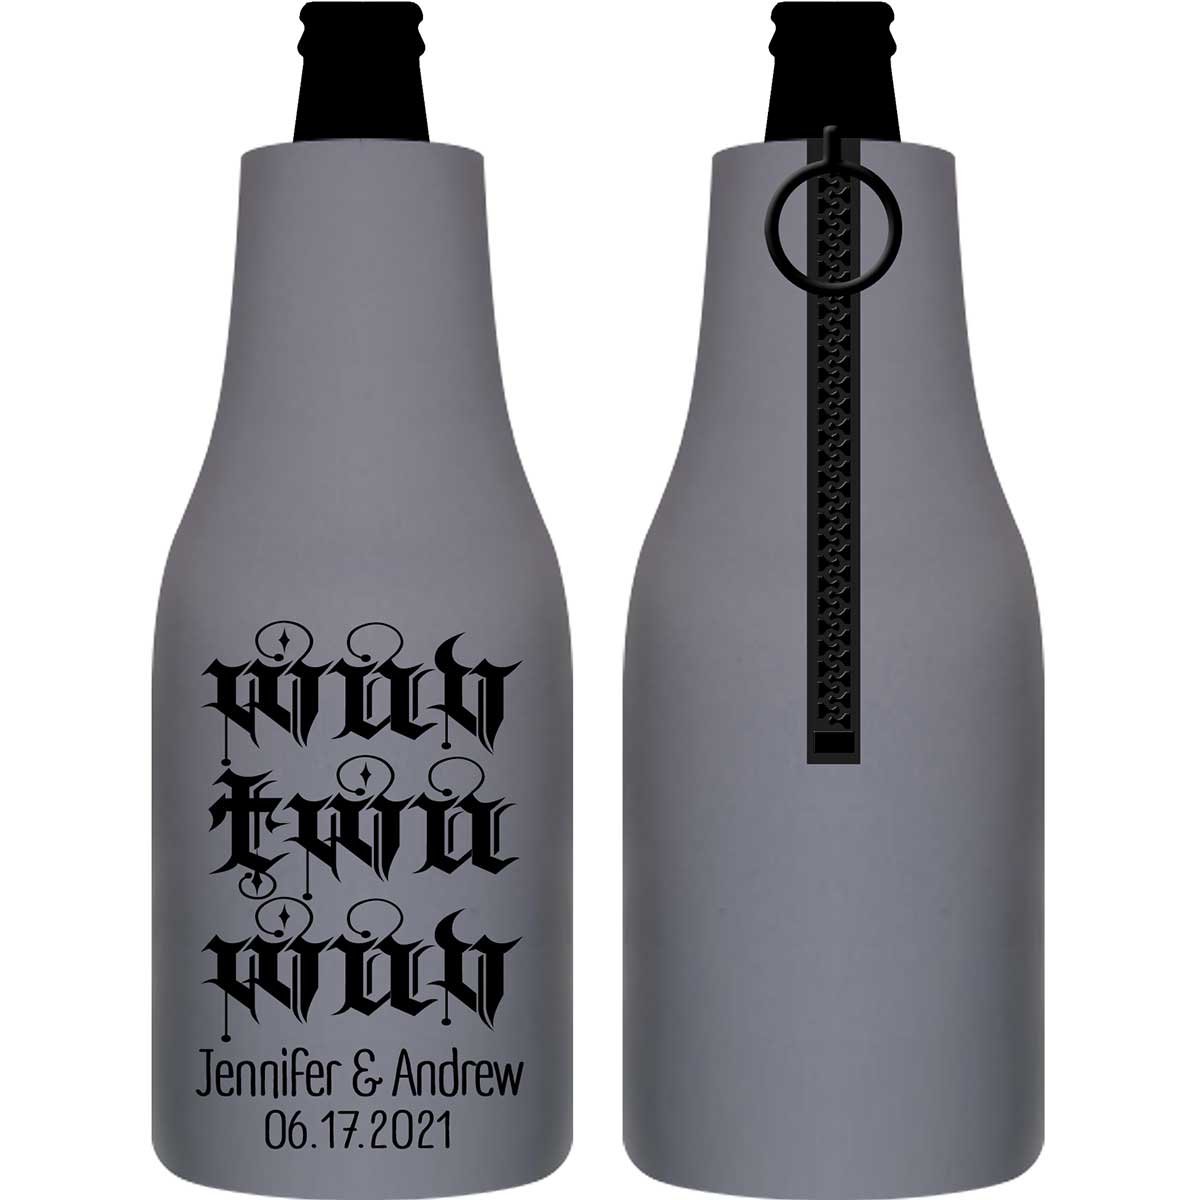 Wuv Twu Wuv 1A Foldable Zippered Bottle Koozies Wedding Gifts for Guests